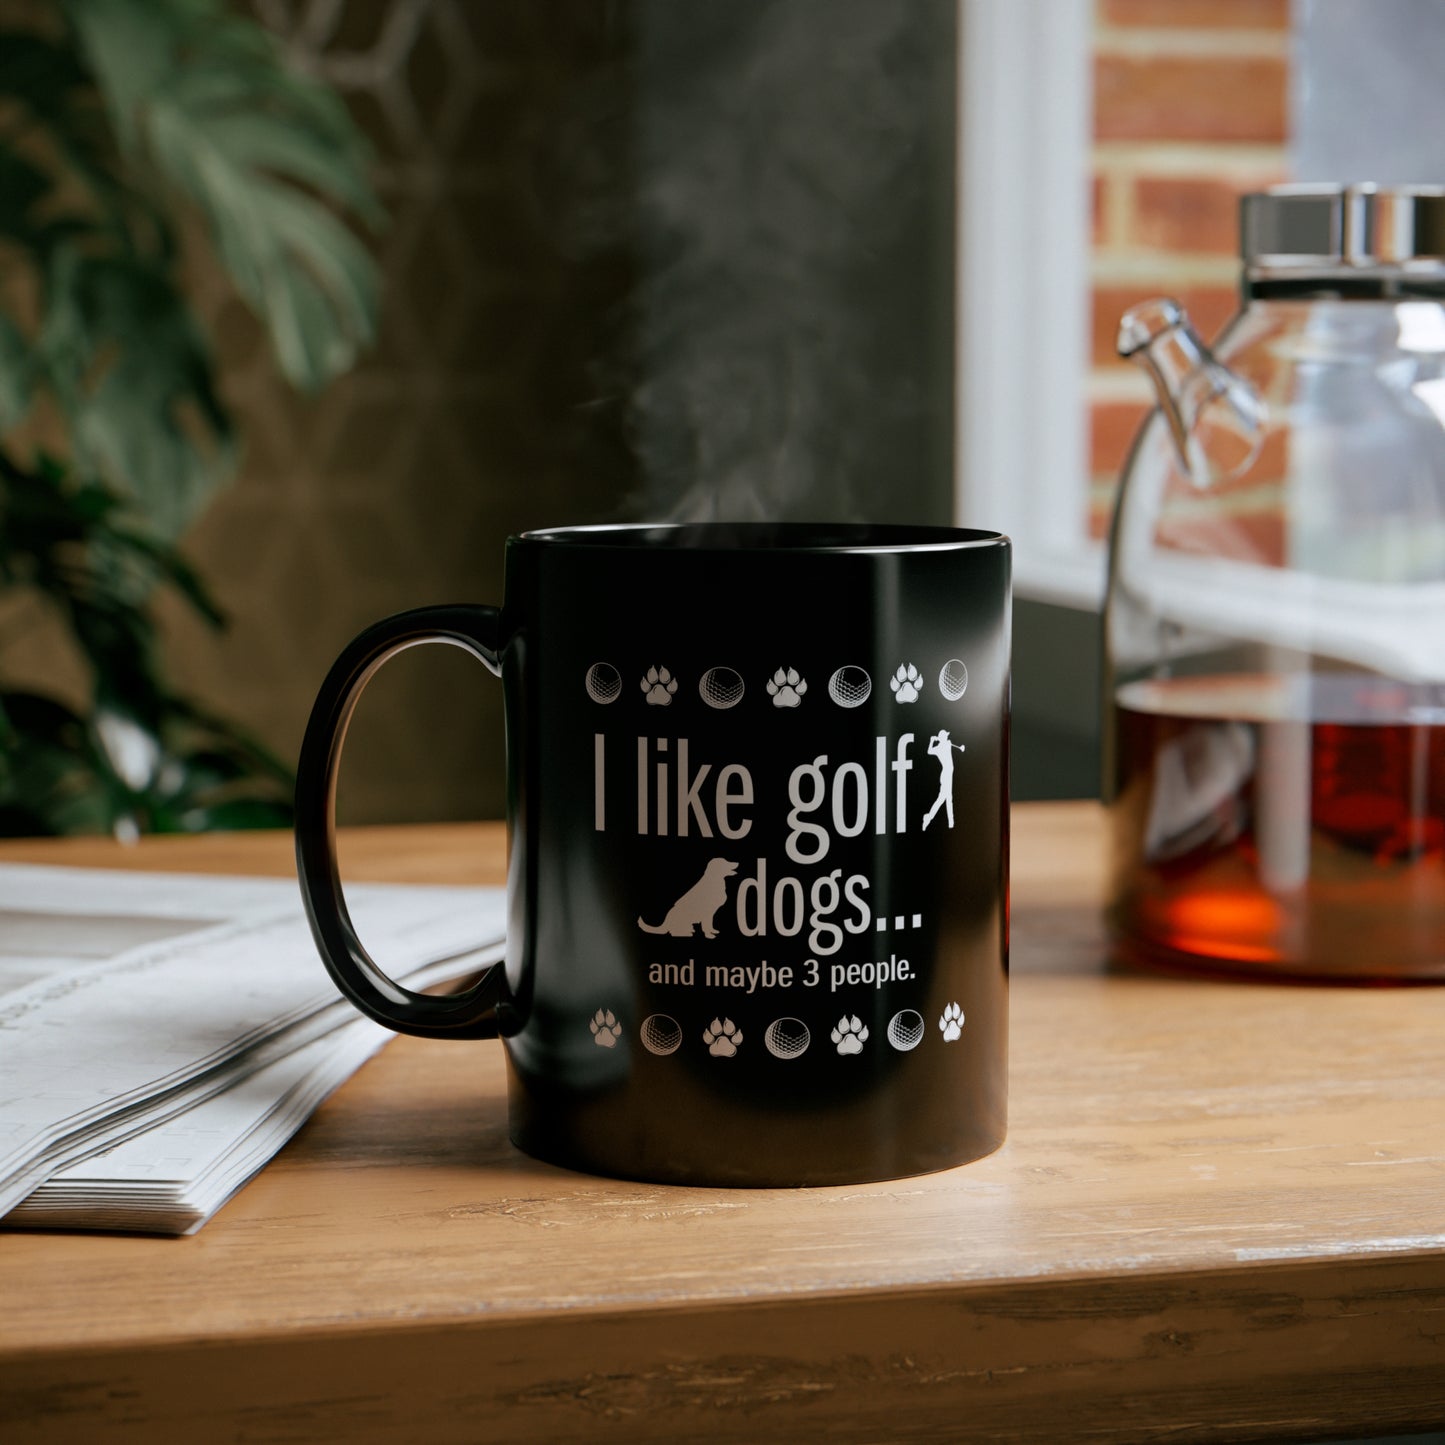 I like golf, dogs and maybe 3 people (This is so accurate) Black ceramic mug